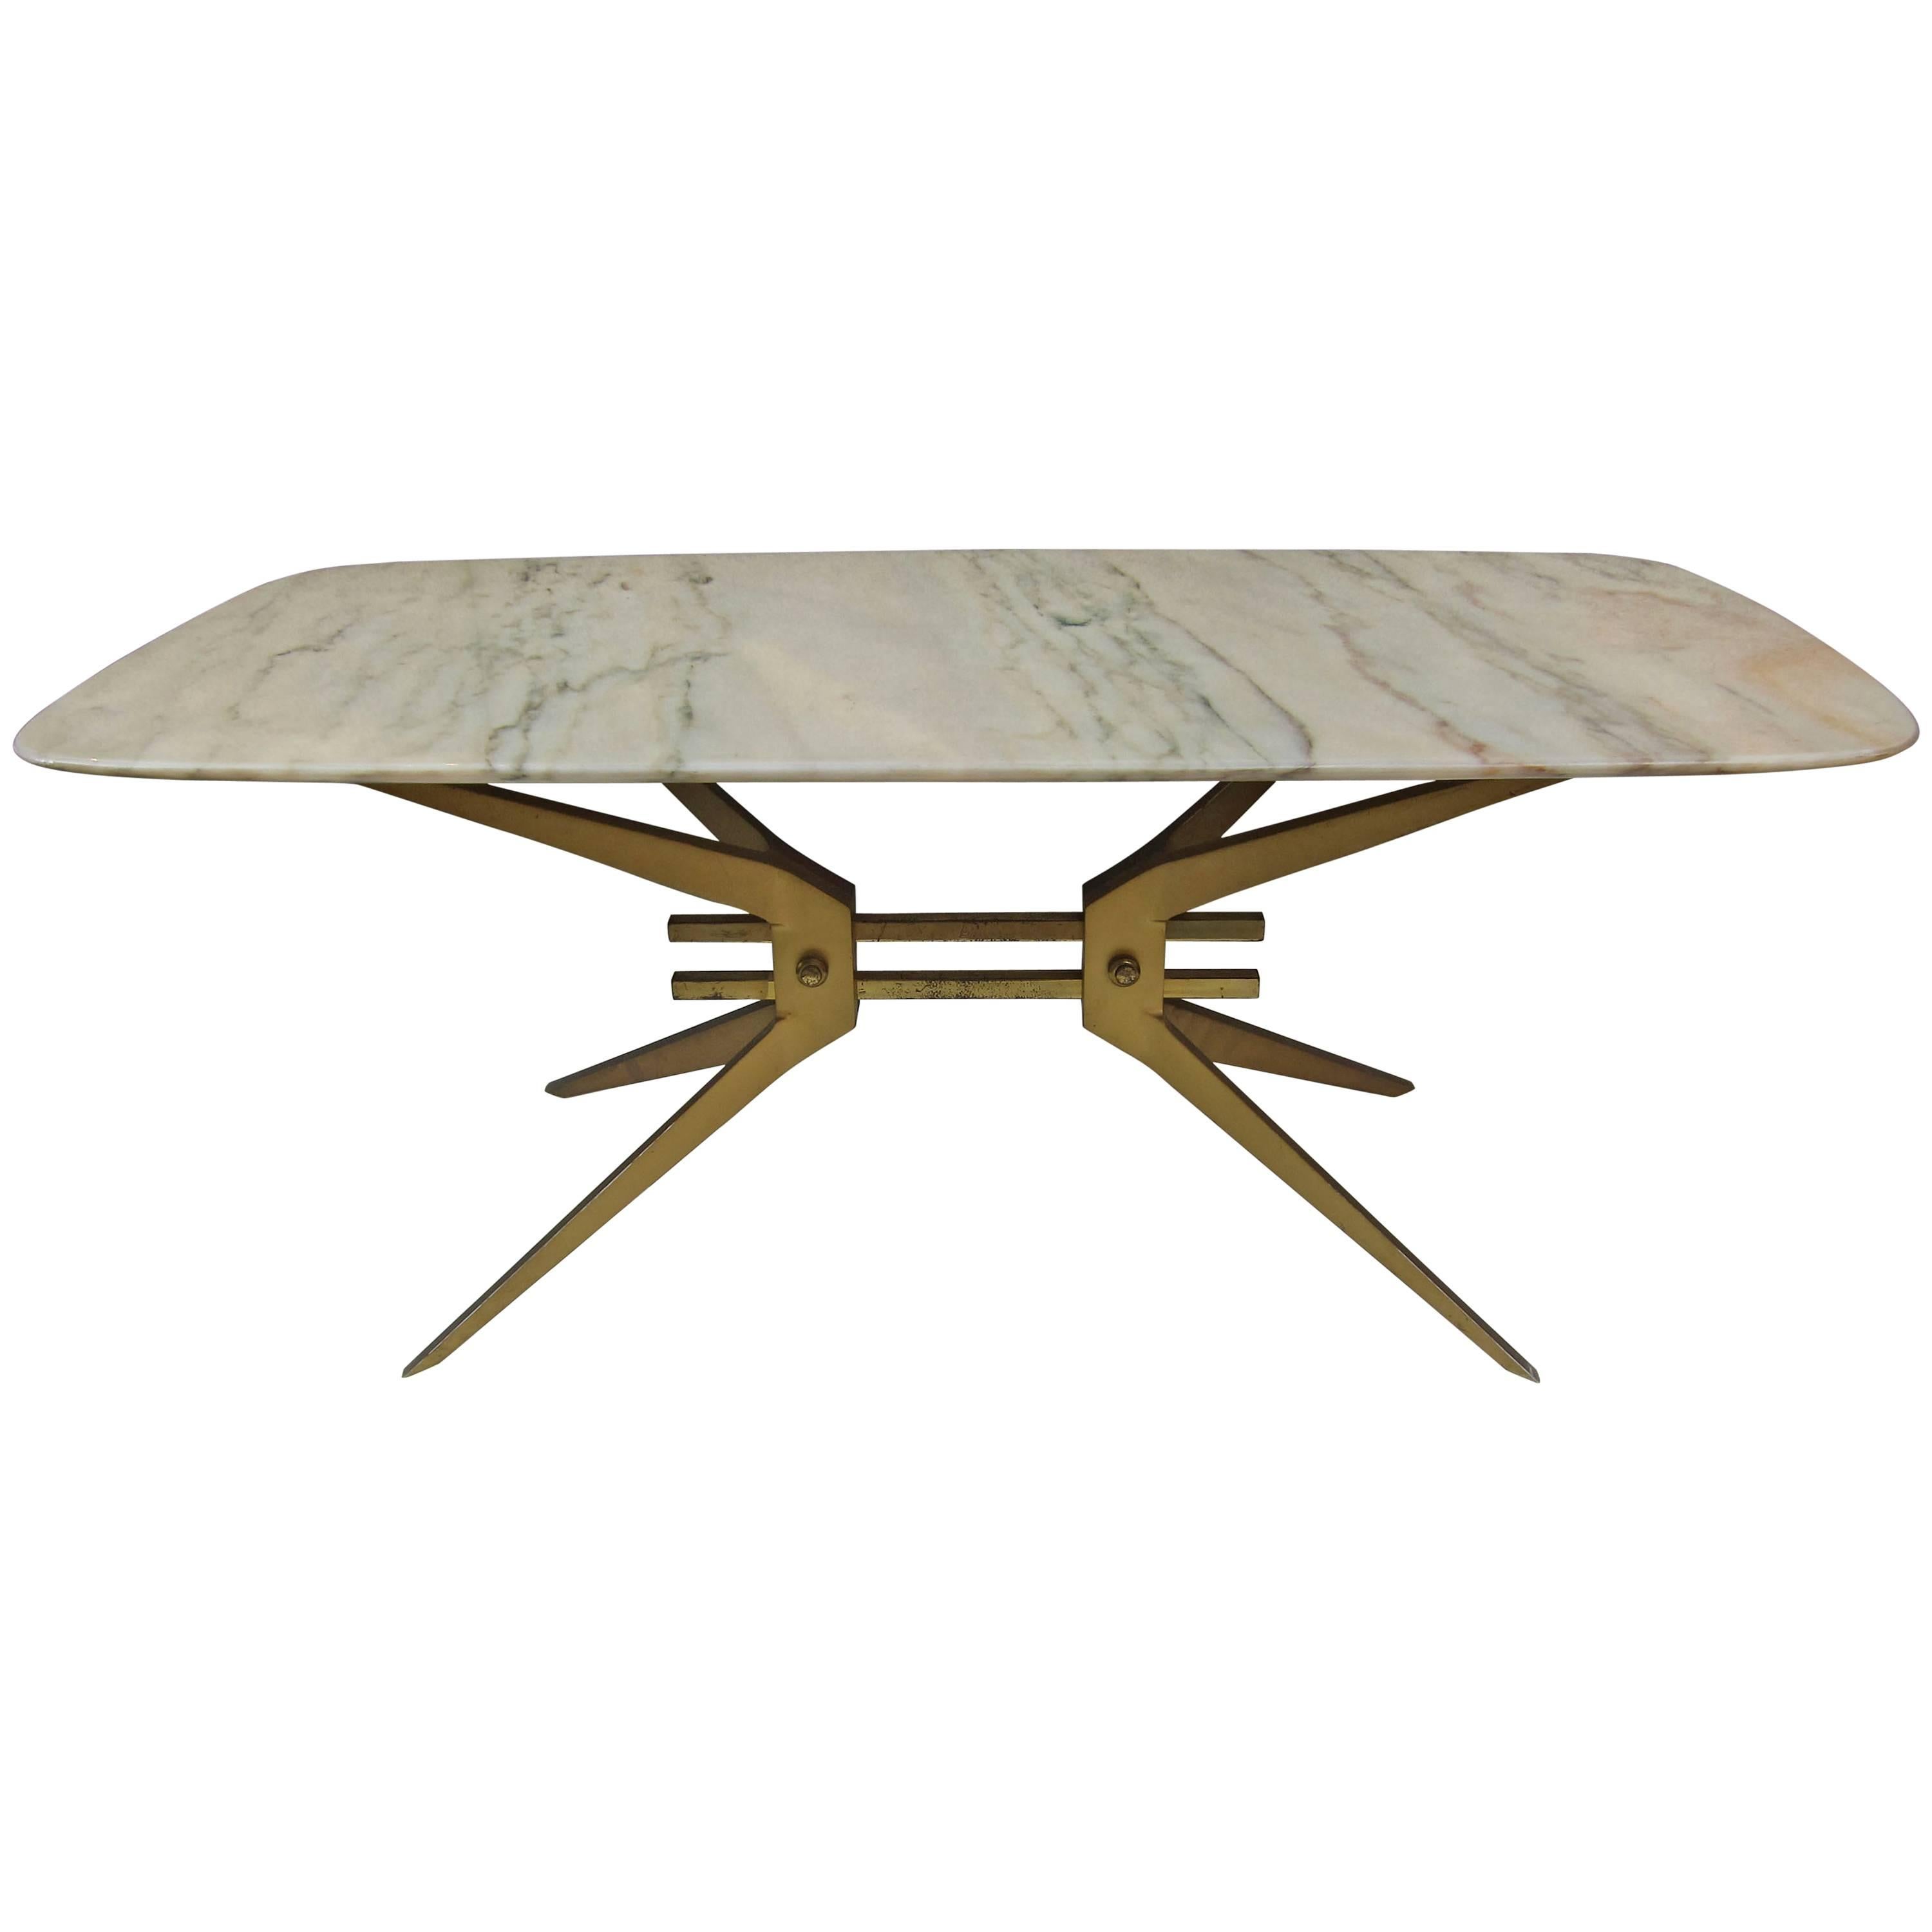 Cesare Lacca Gilded Brass and Marble Top Coffee Table, Italy, 1950 For Sale